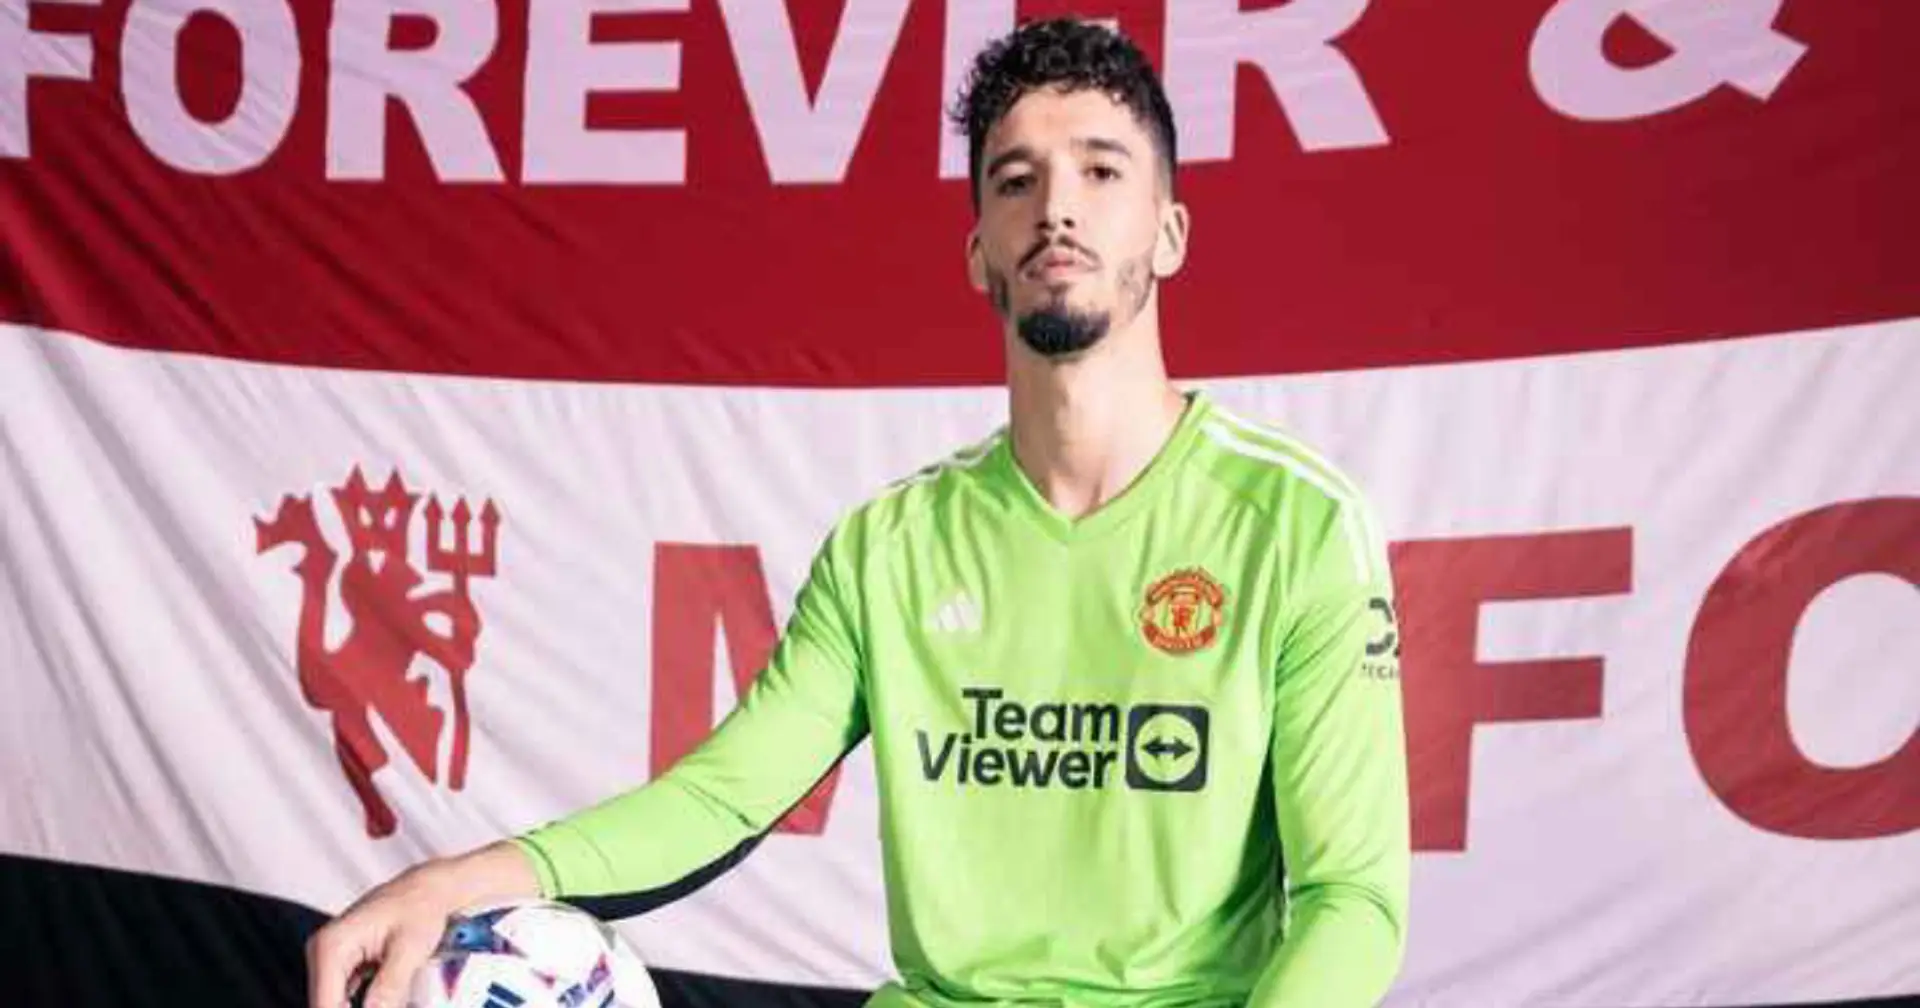 'I will give everything': Altay Bayindir's first words as a Man United player